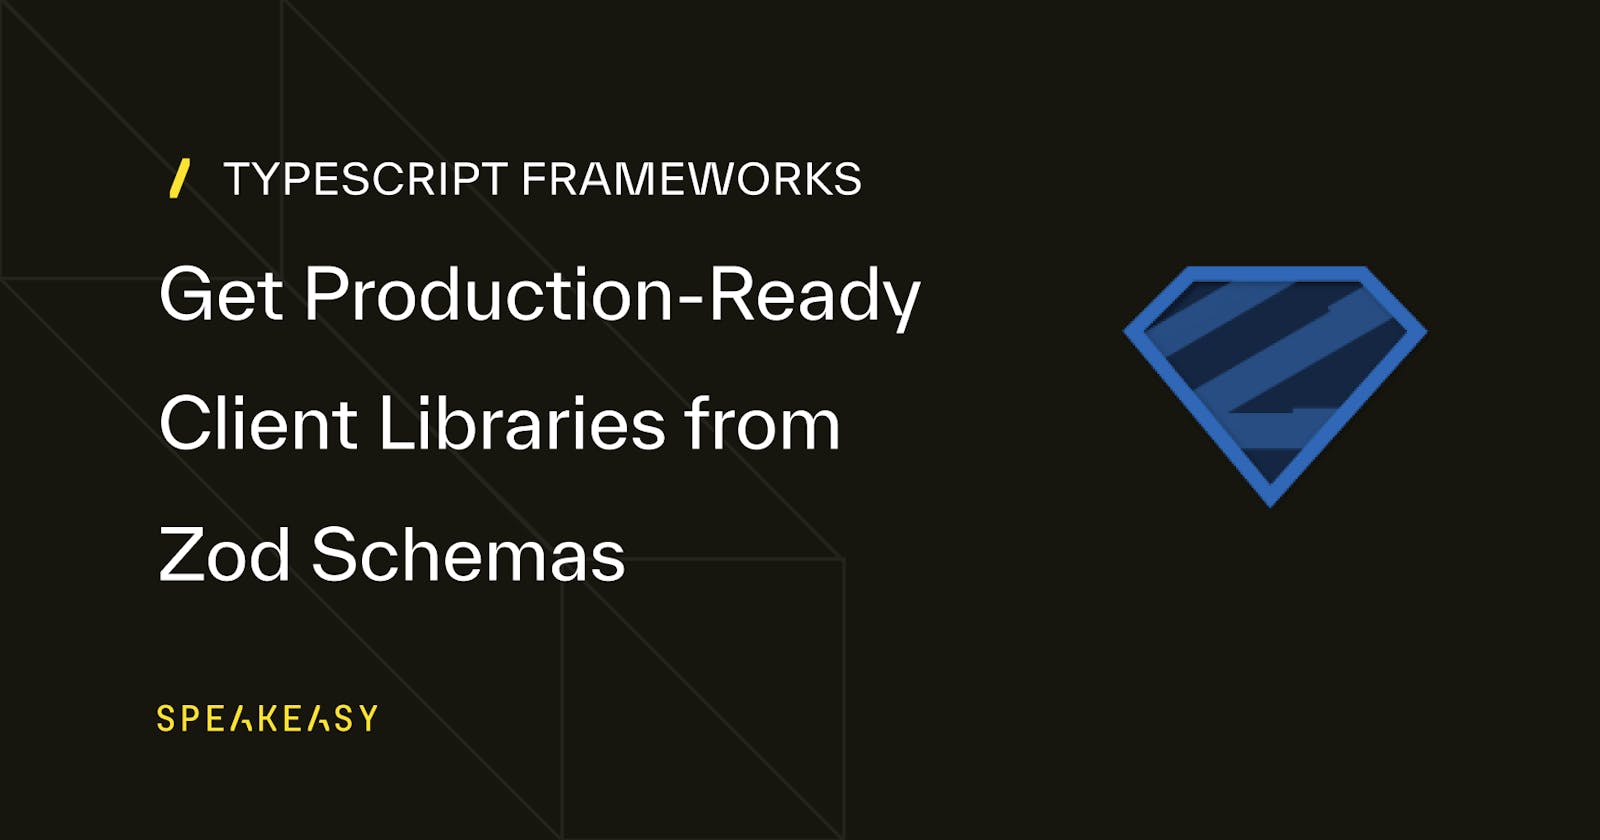 Get Production-Ready Client Libraries from Zod Schemas